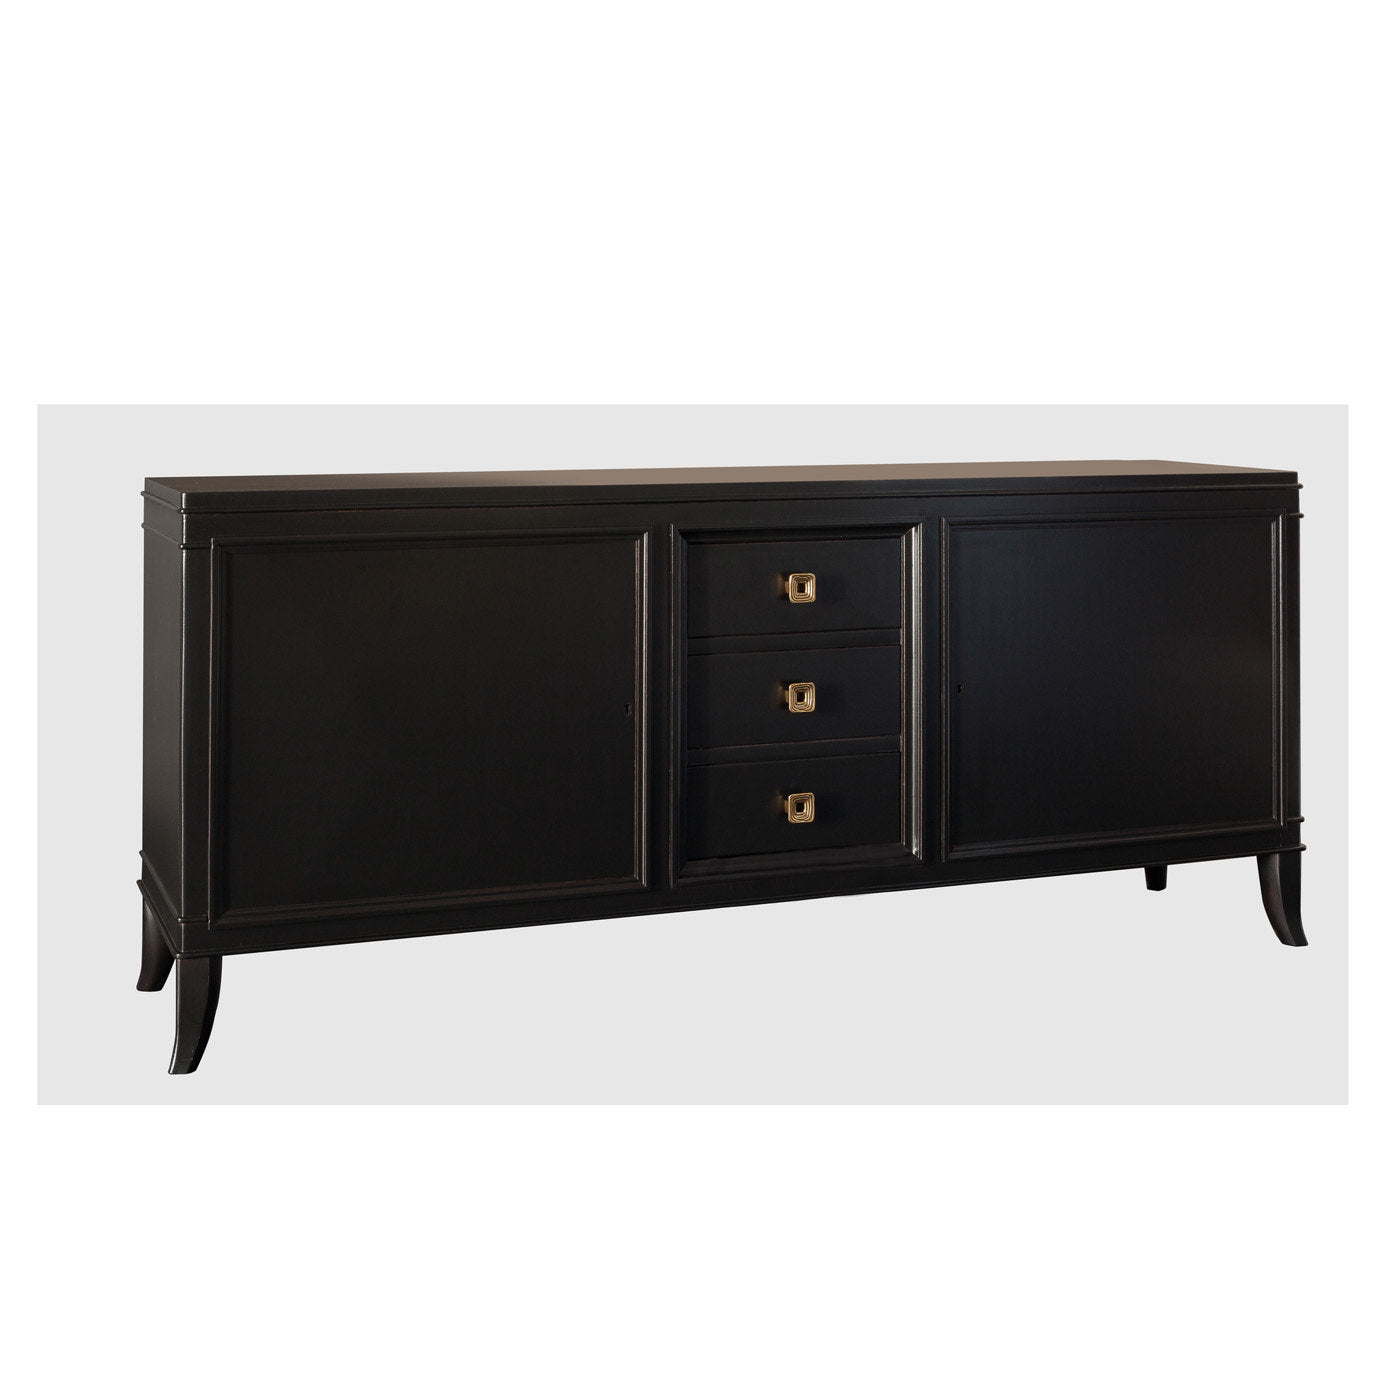 Olimpia Sideboard With Three Drawers - Alternative view 1